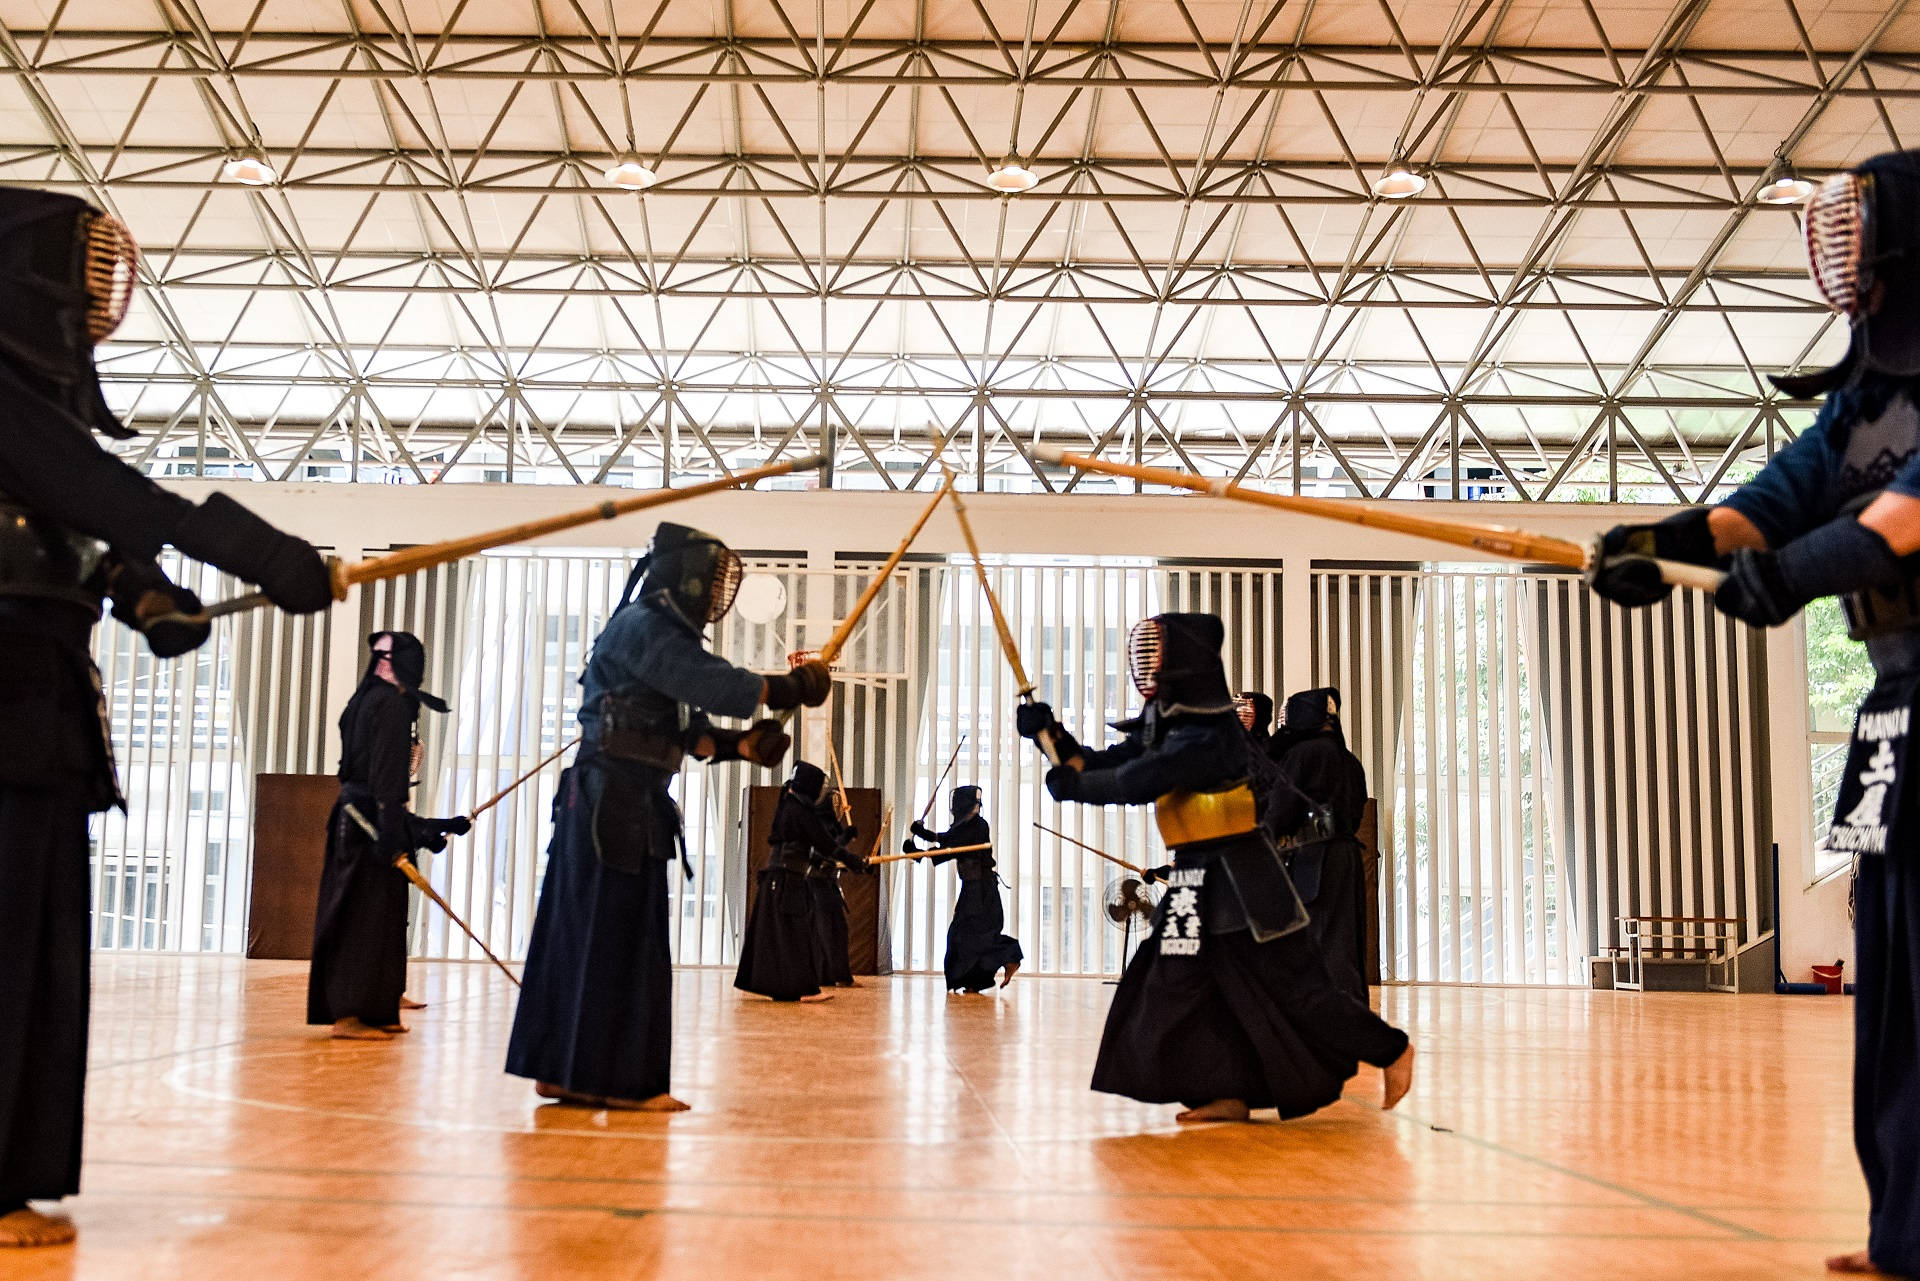 Free Kendo Wallpaper Downloads, [100+] Kendo Wallpapers for FREE |  